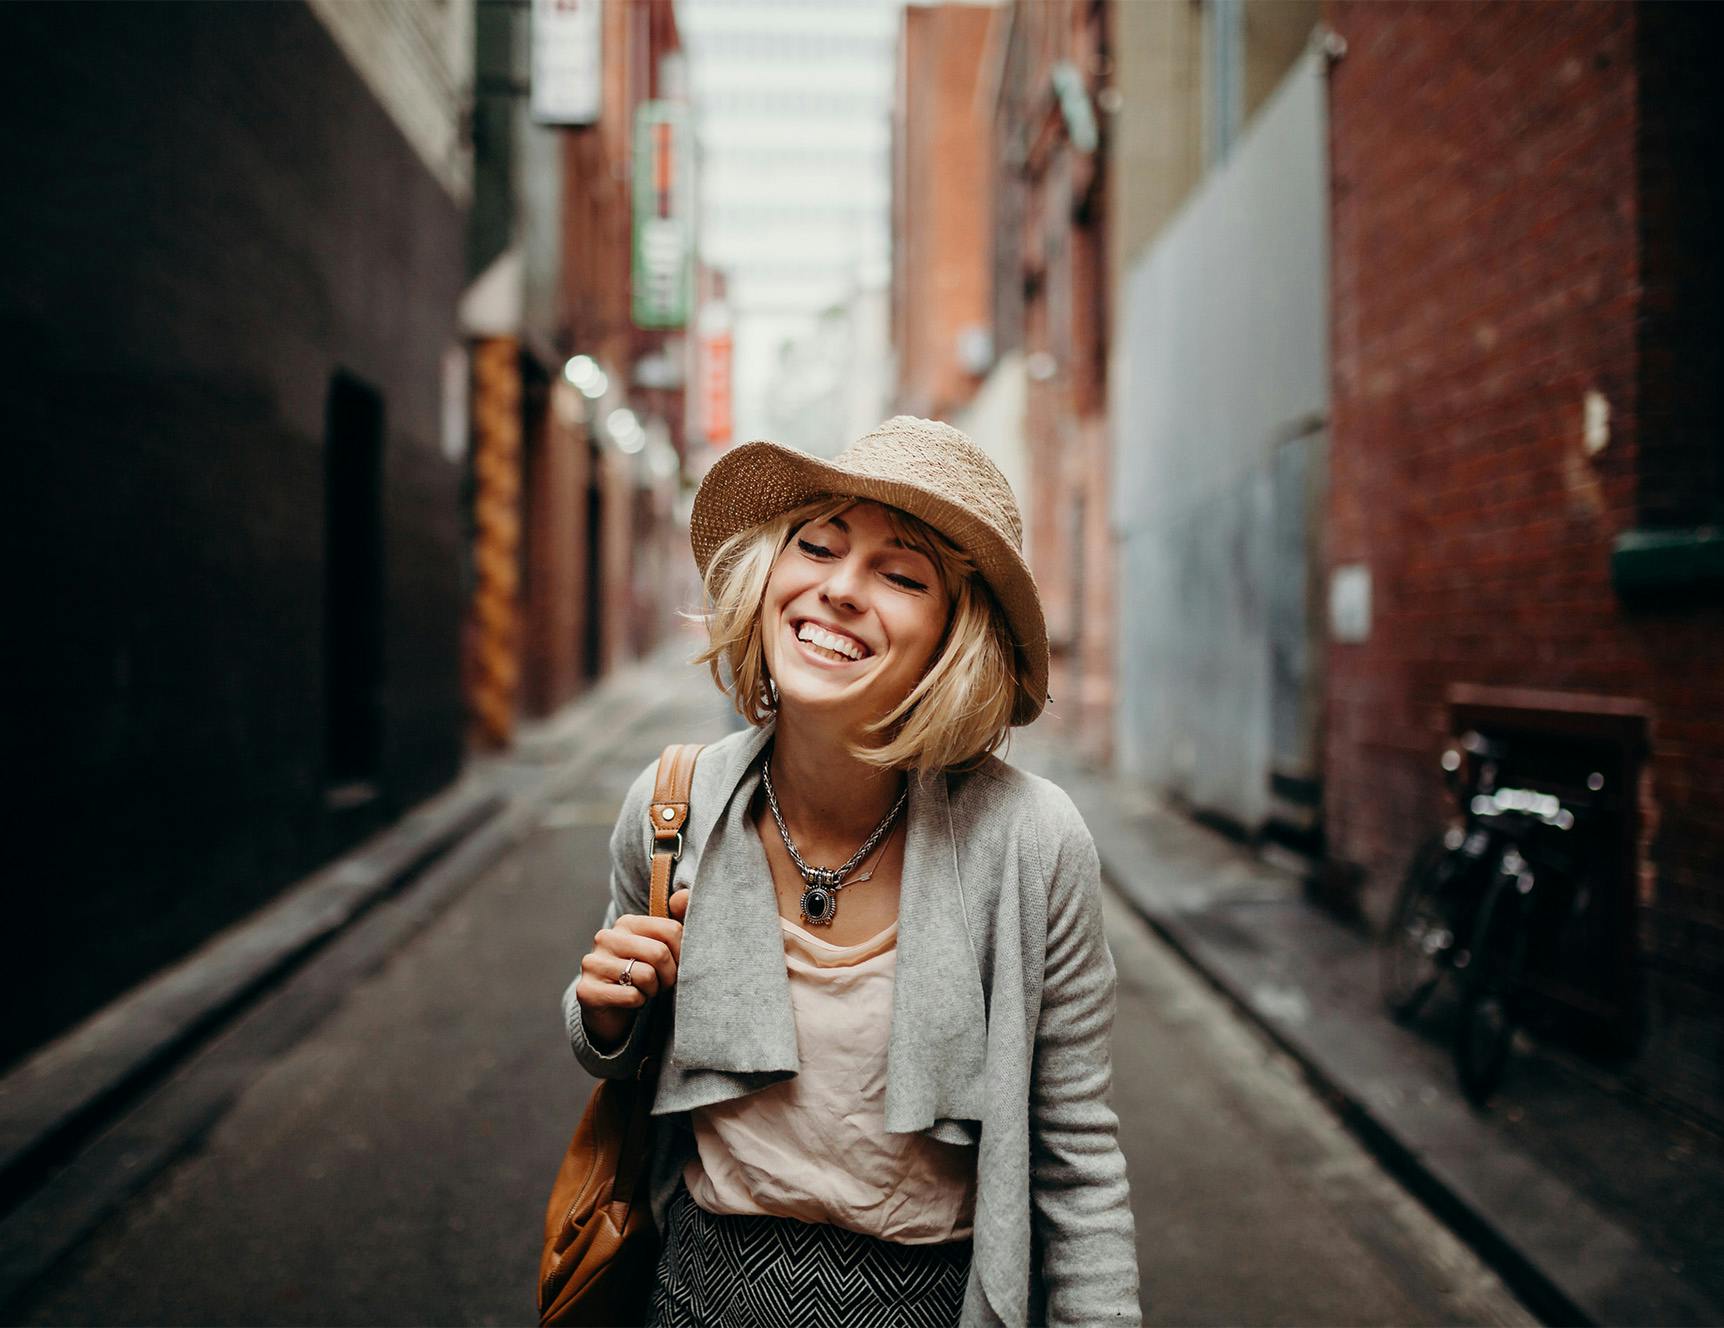 smiling on walk down city alley